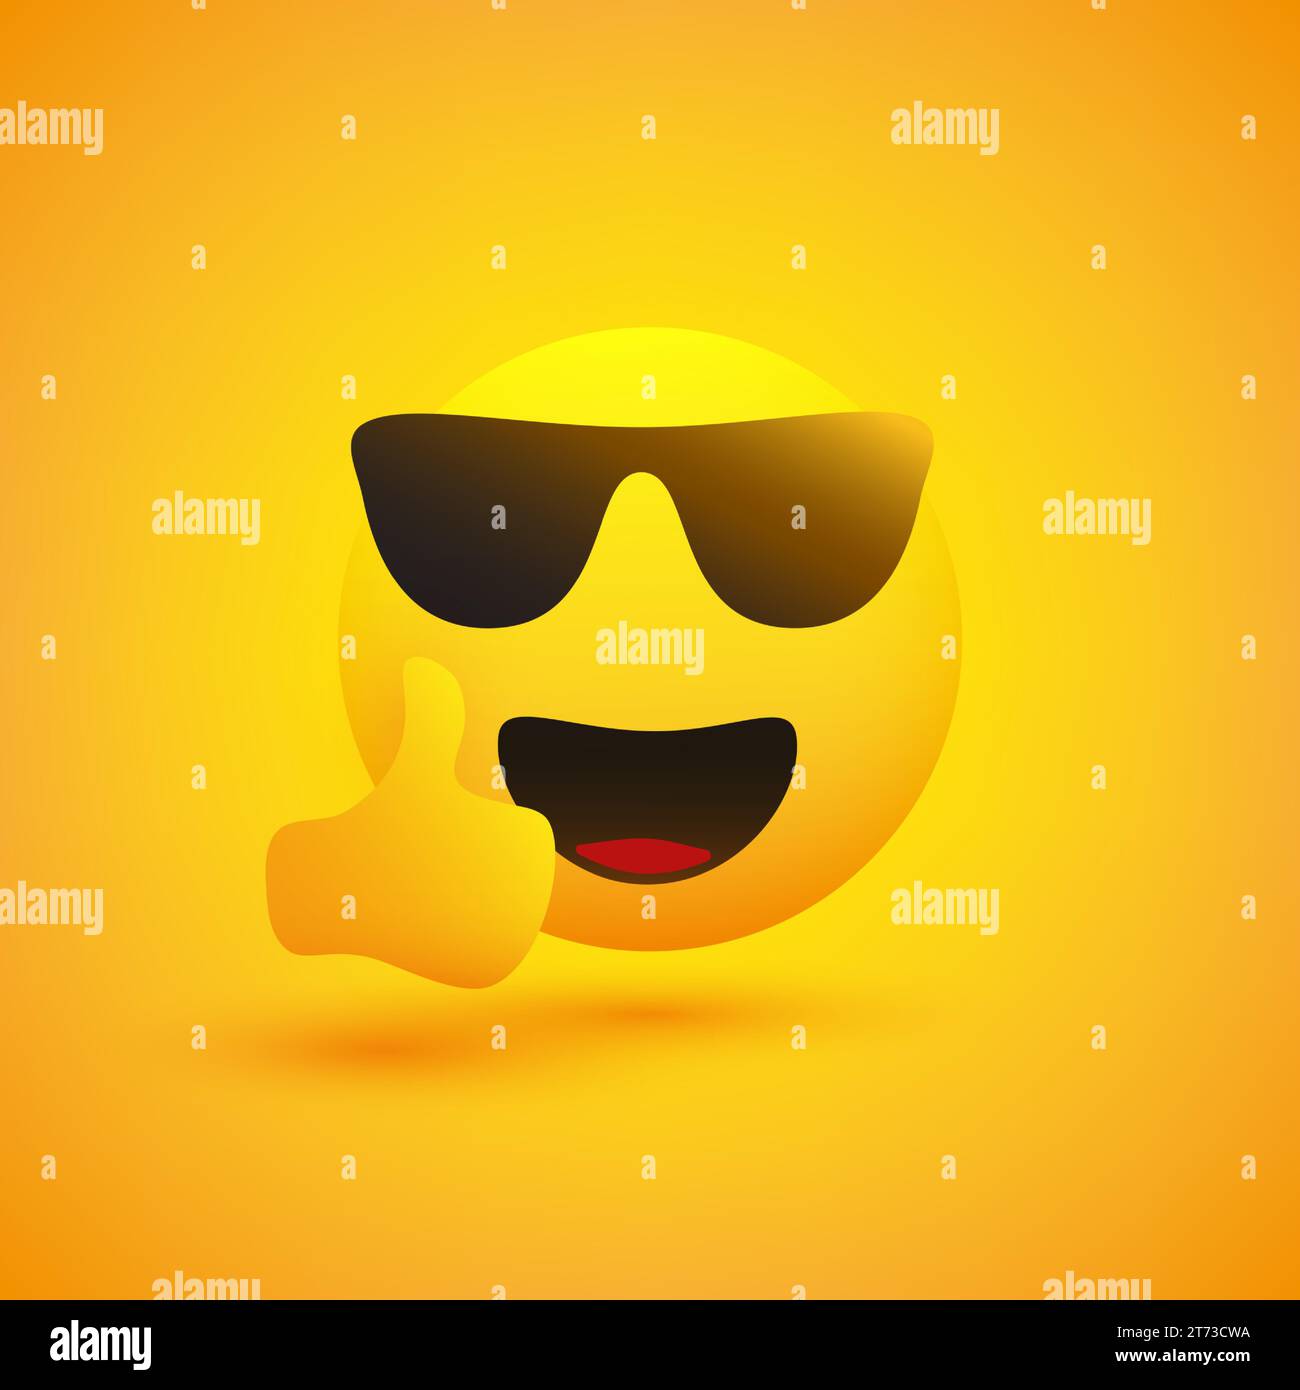 Smiling, Cheering Emoji with Sunglasses Showing Thumbs Up on Yellow Background - Vector Design Stock Vector